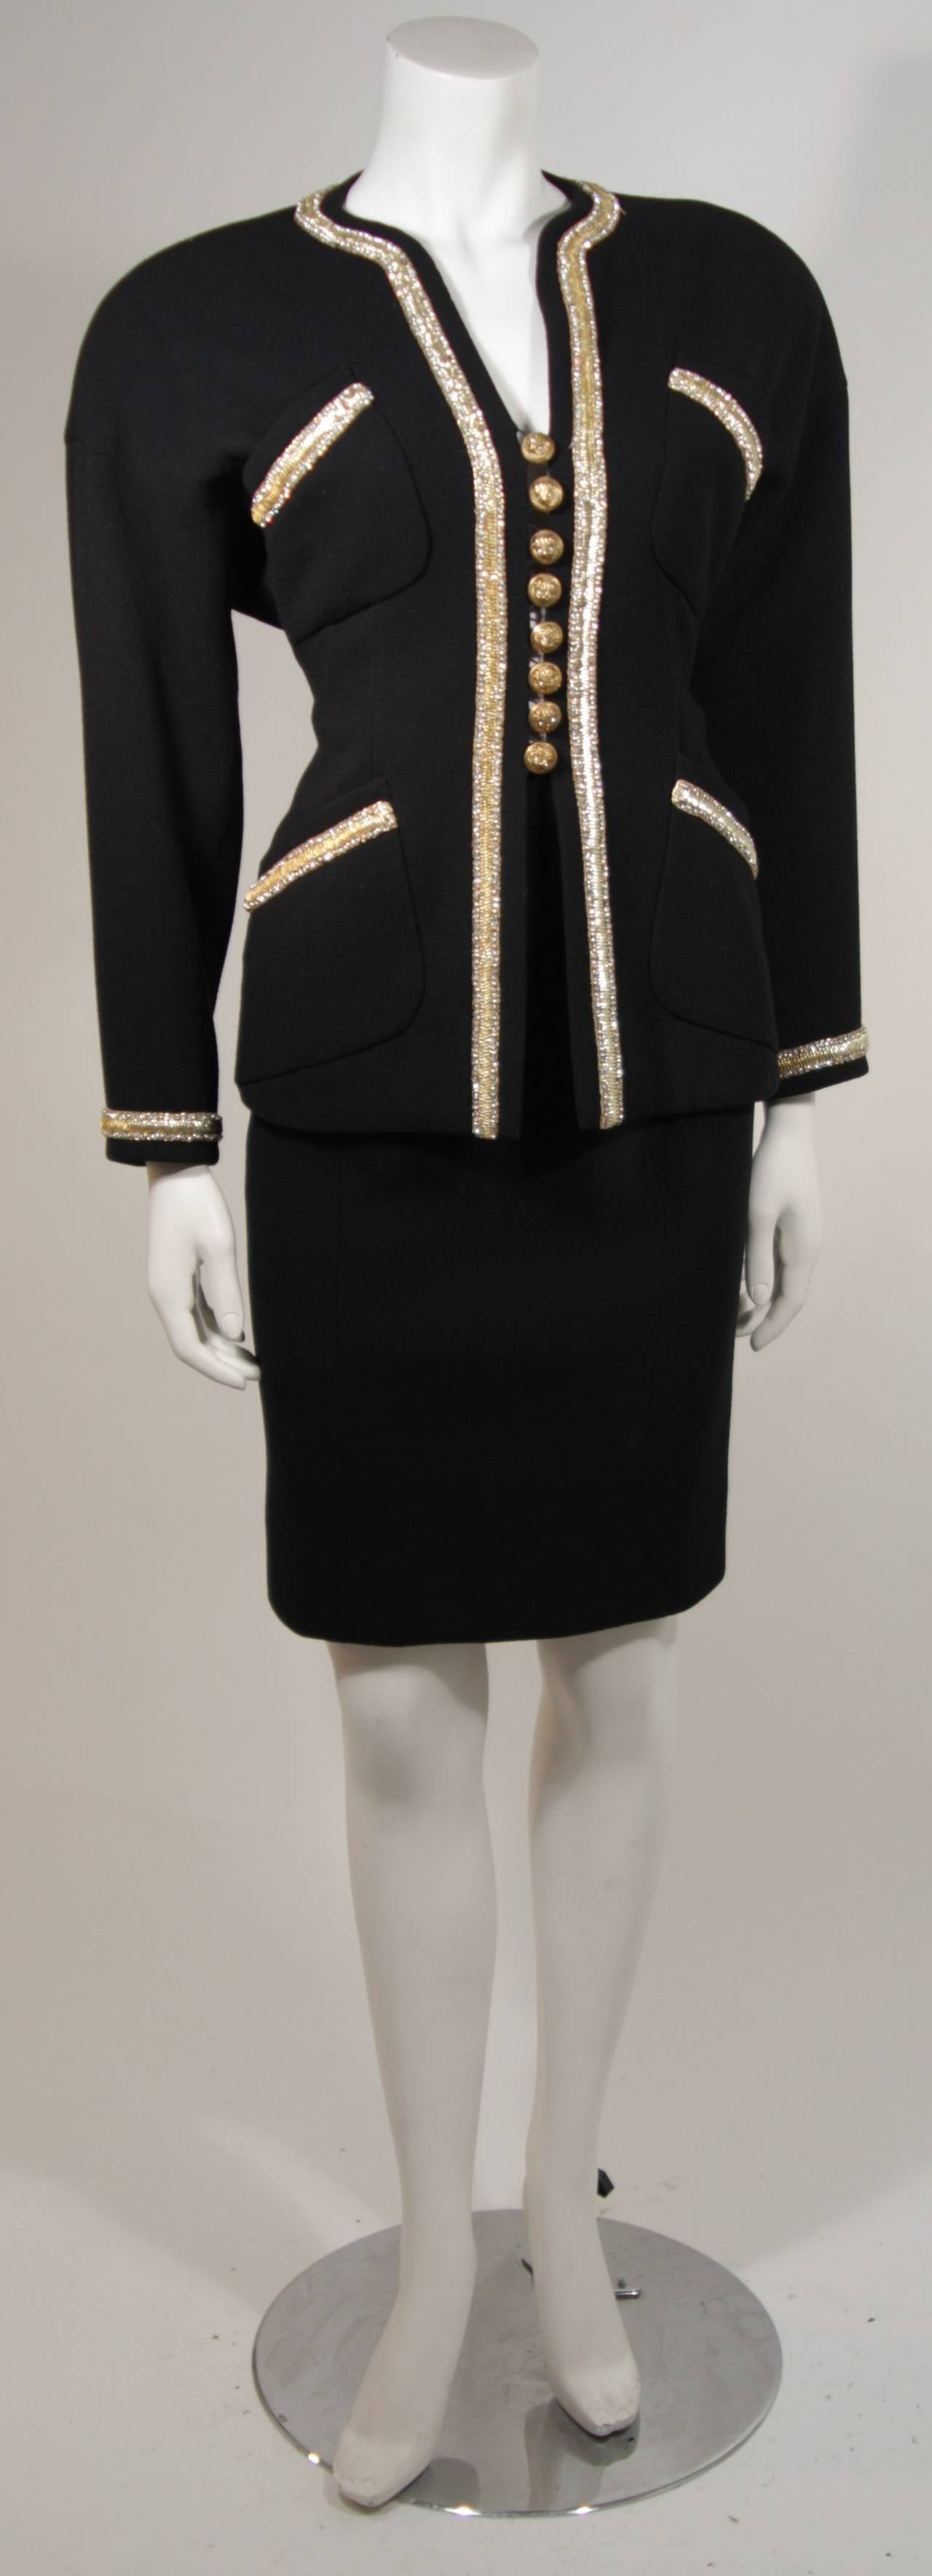 This Chanel suit is available for viewing at our Beverly Hills Boutique. The skirt suit is composed of a black wool and silk lining.The set is accented with a gold beaded trim and owl design buttons. The jacket has four front pockets and center